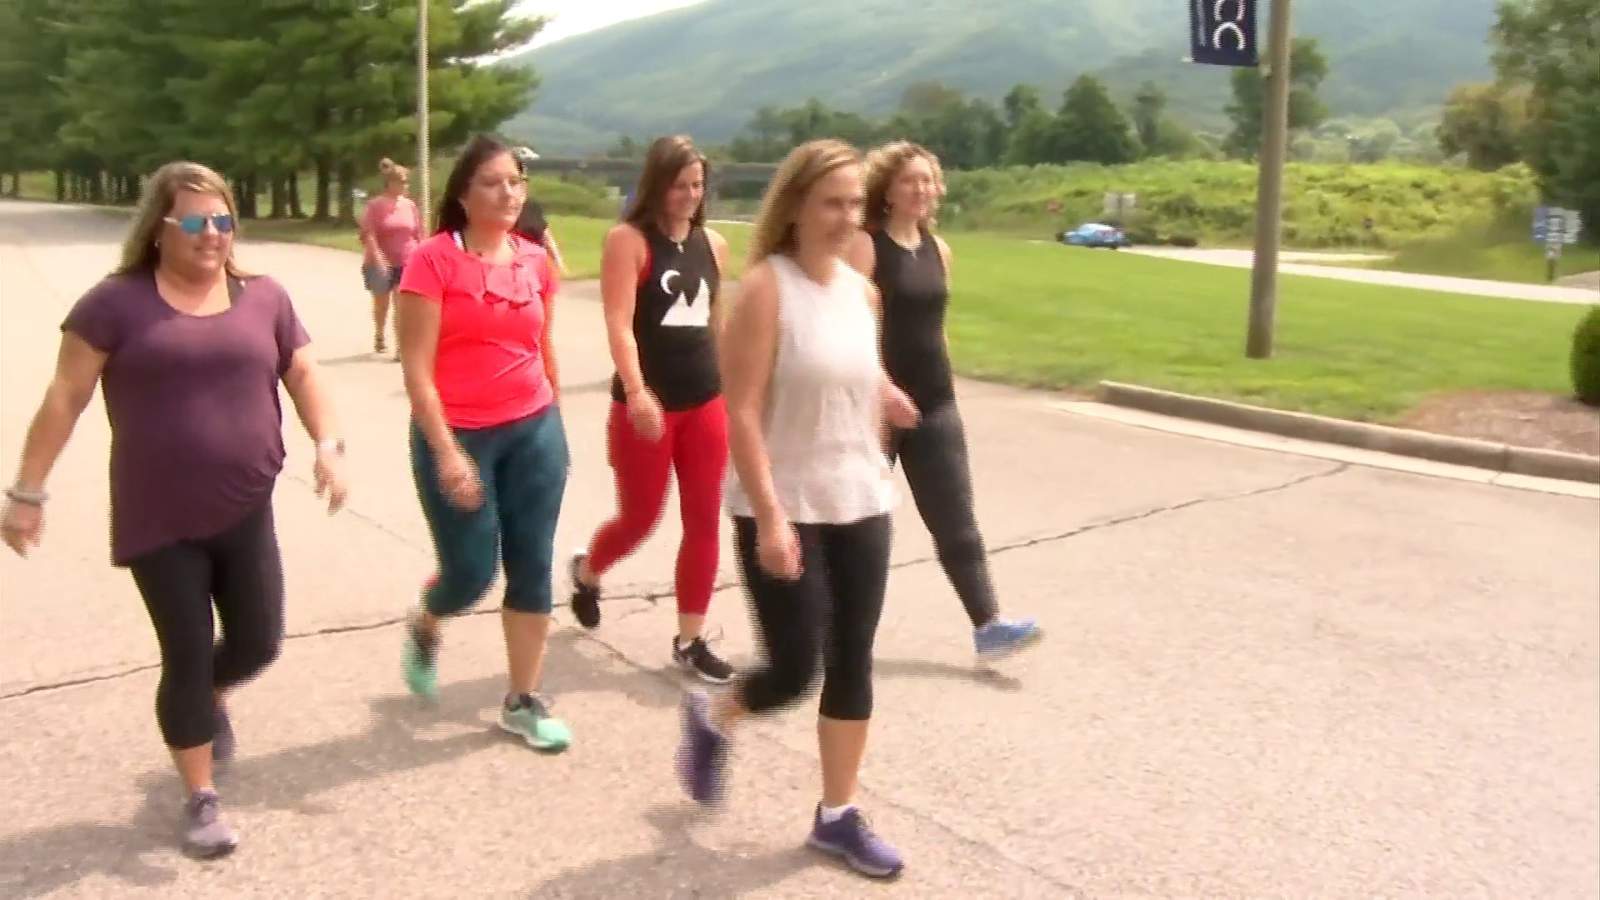 Local woman creates fitness group during pandemic, with members from around the world